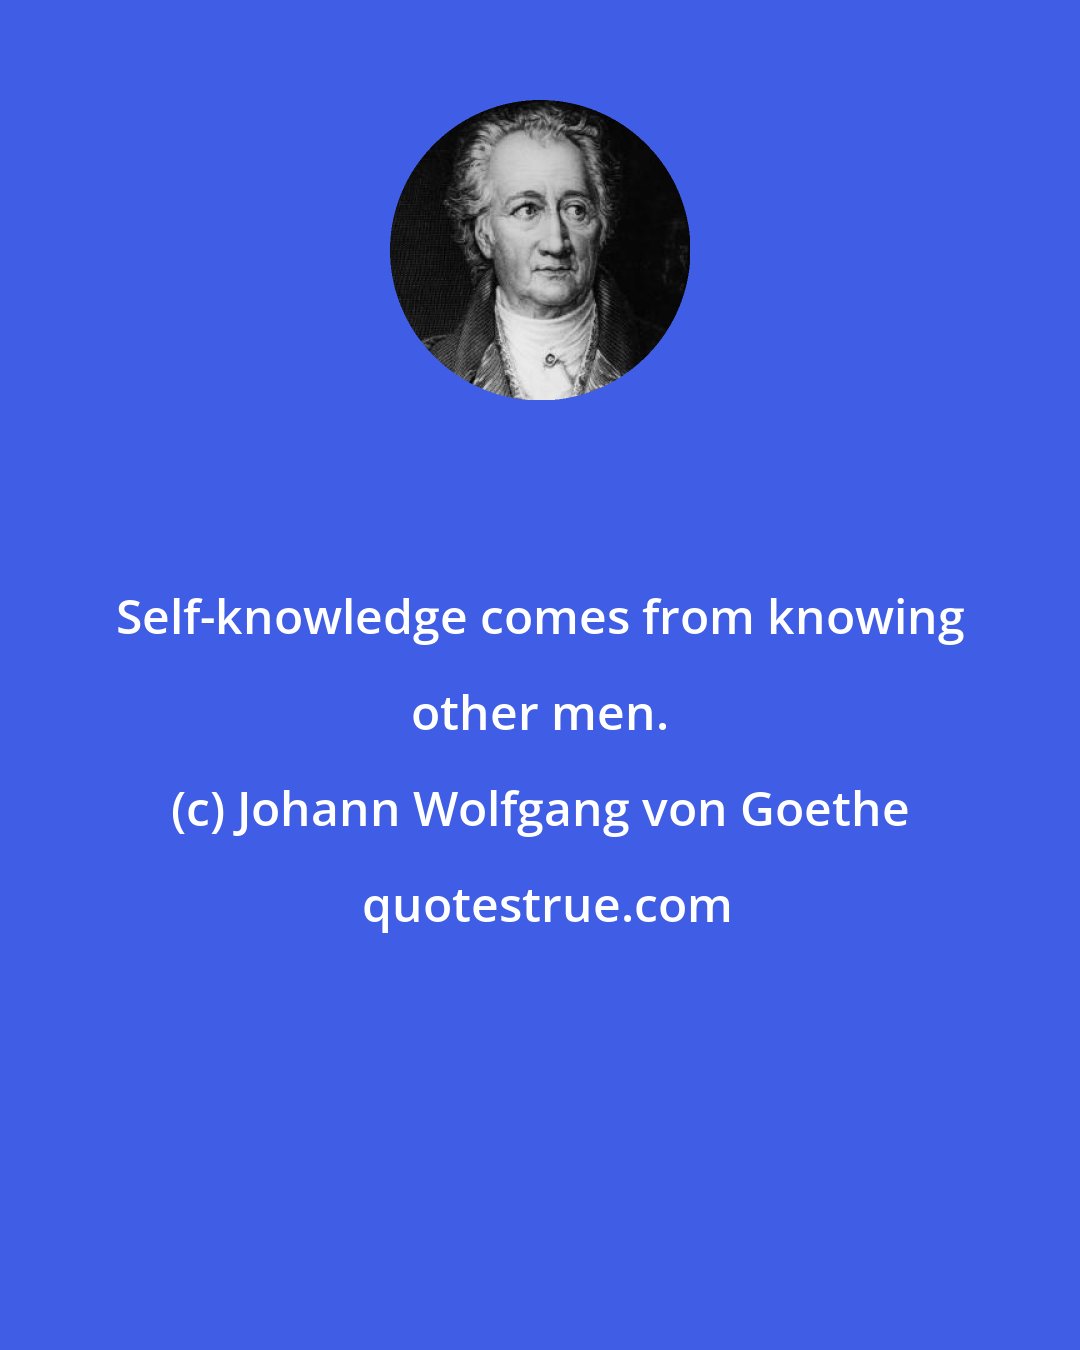 Johann Wolfgang von Goethe: Self-knowledge comes from knowing other men.